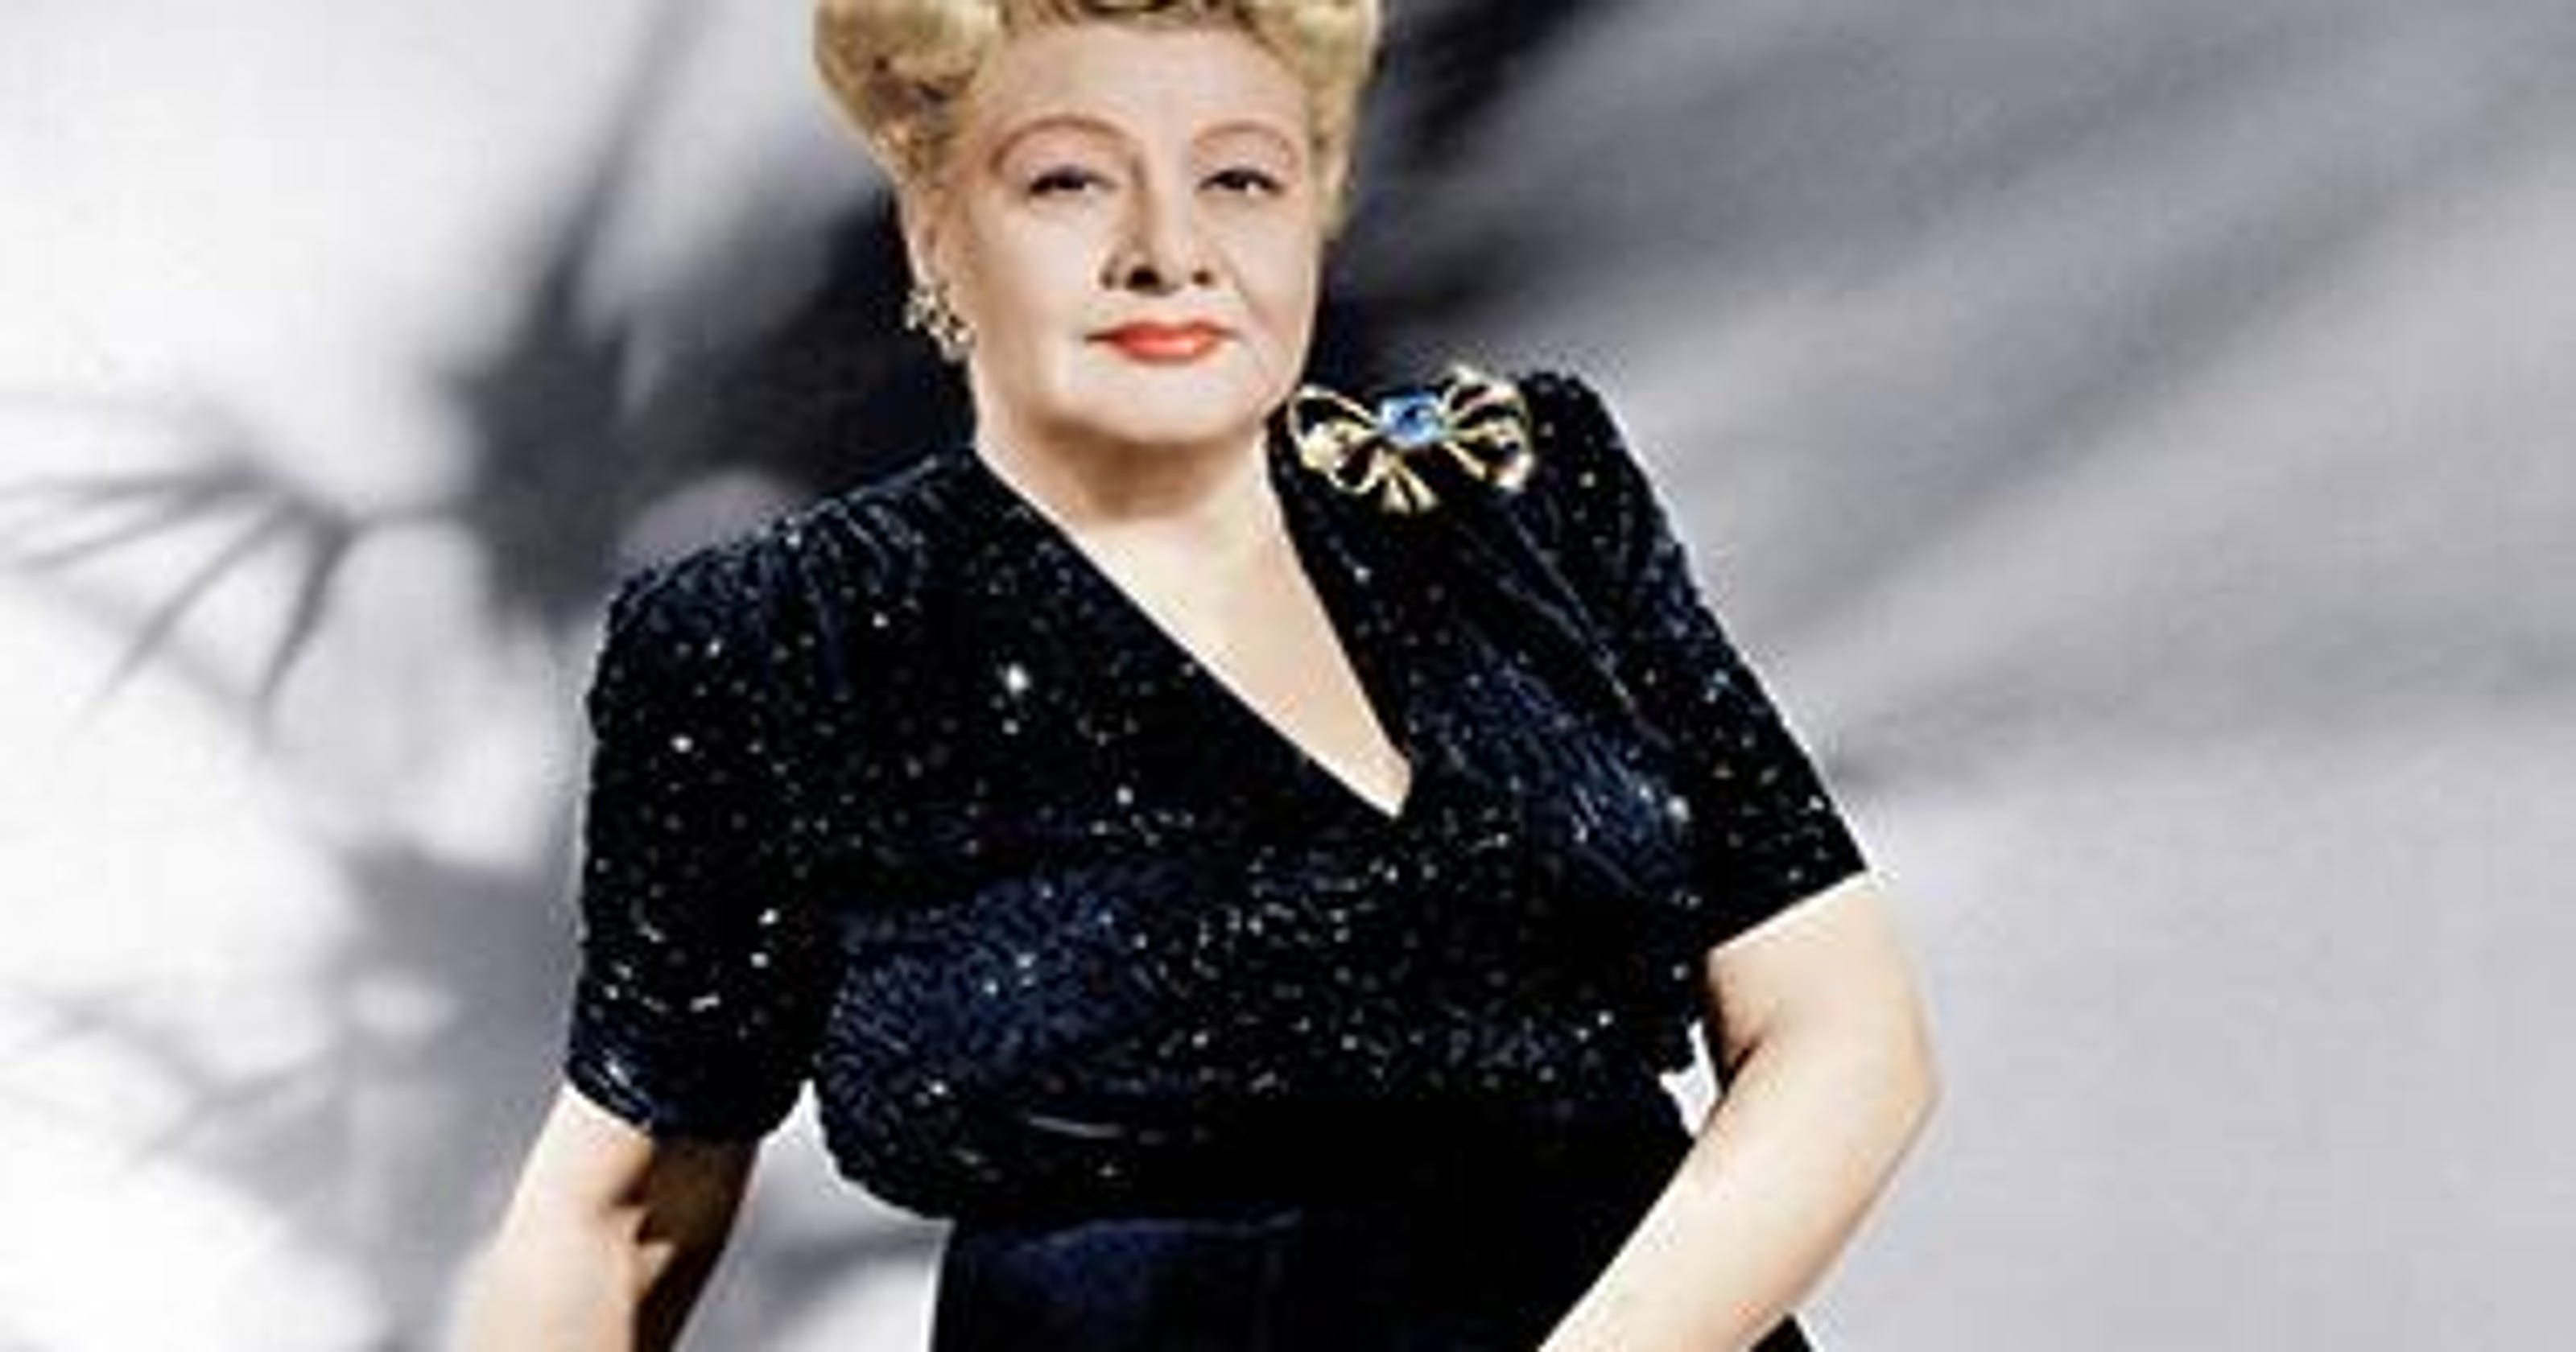 Nearly Forgotten Singer Sophie Tucker Is Given A Second Look 